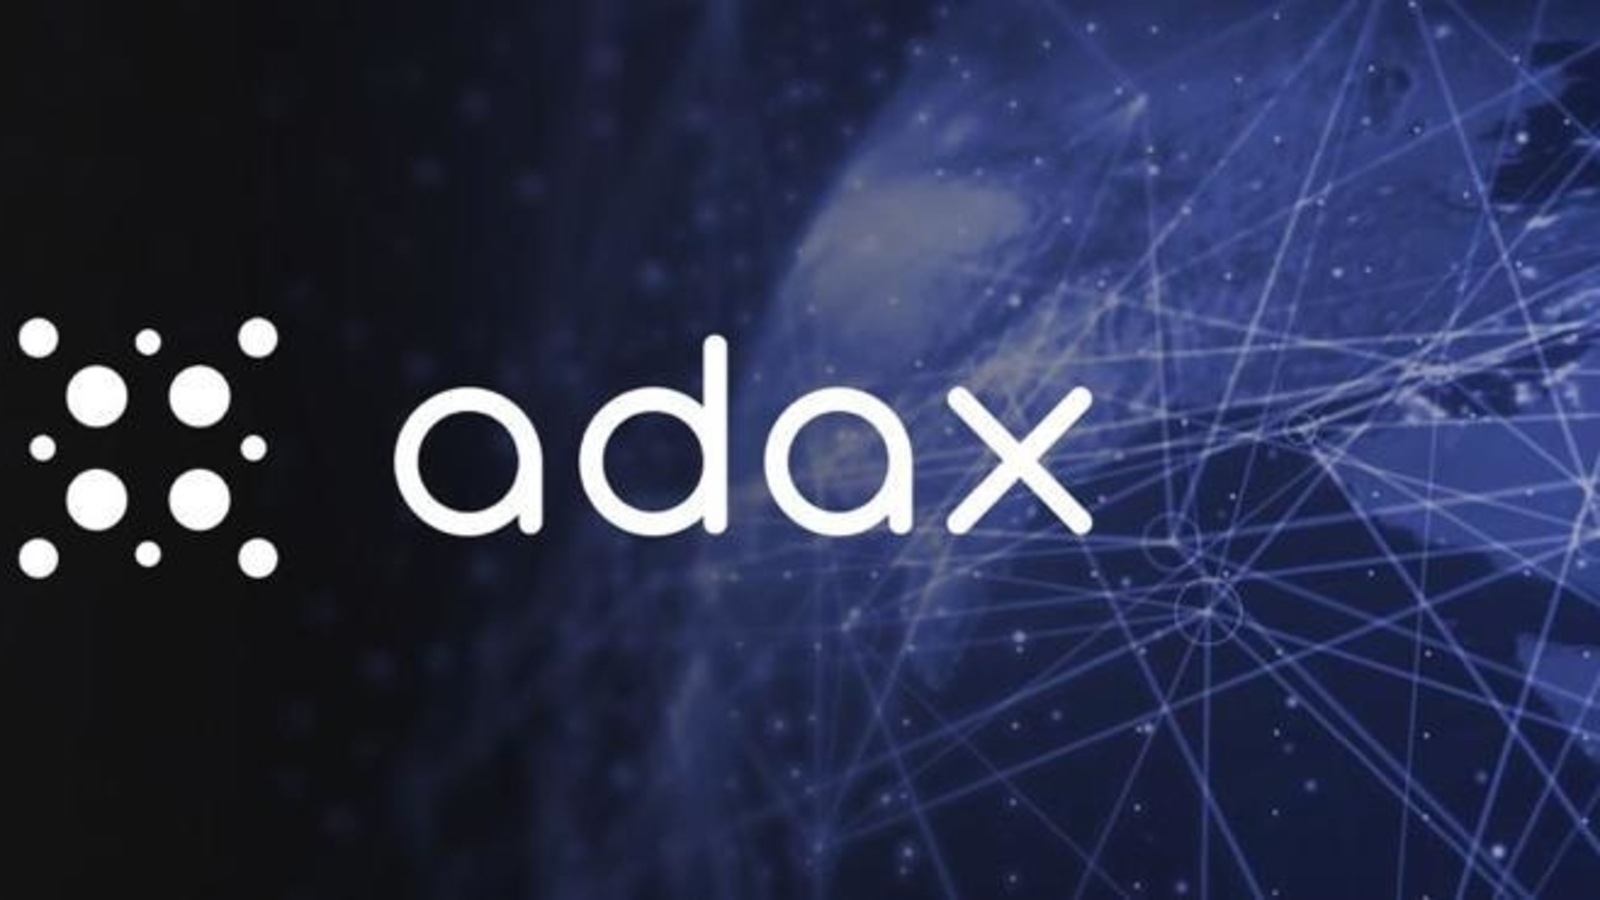 ADAX: State-of-the-art Decentralized Exchange Protocol ...